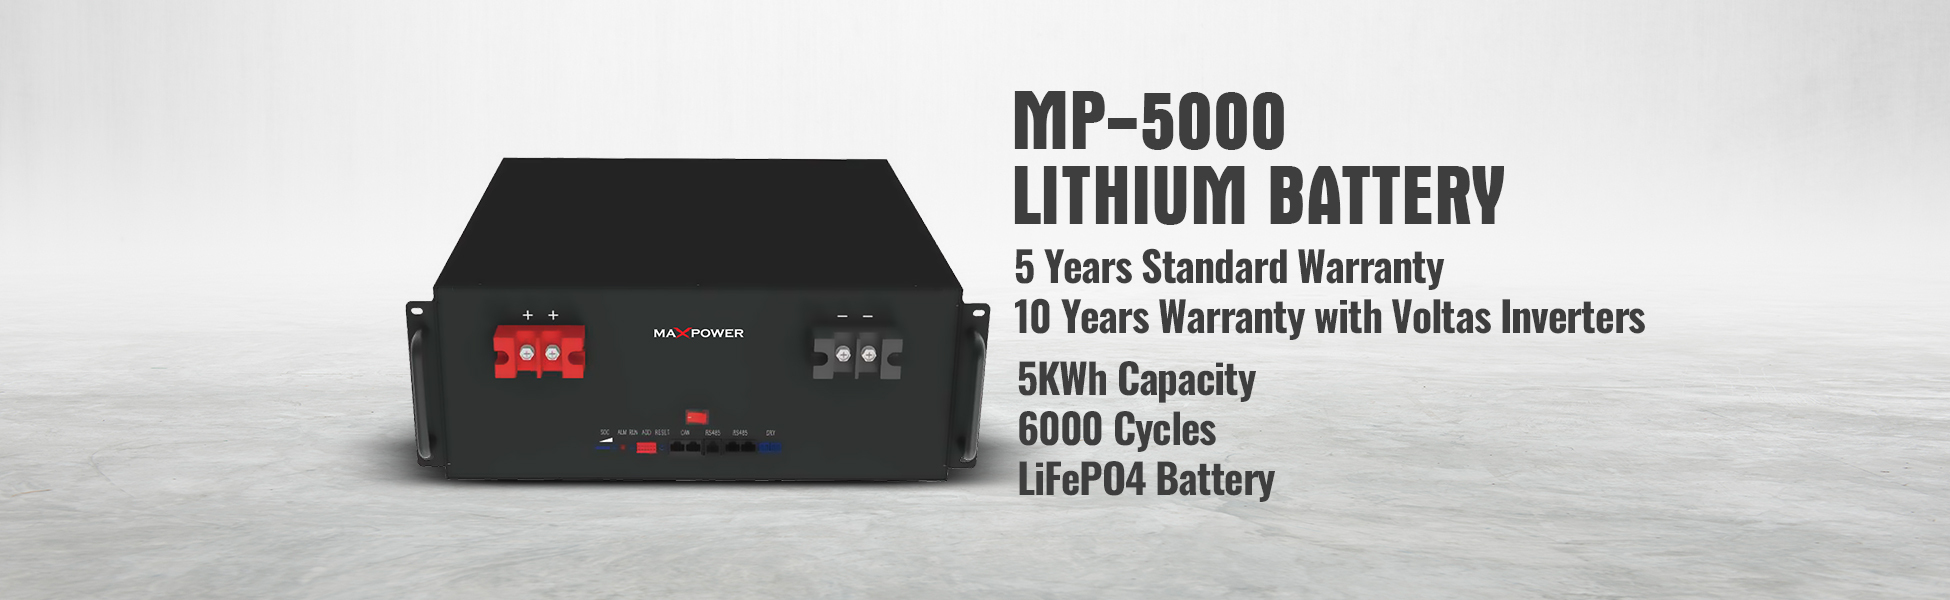 MP-5000 Lithium Battery